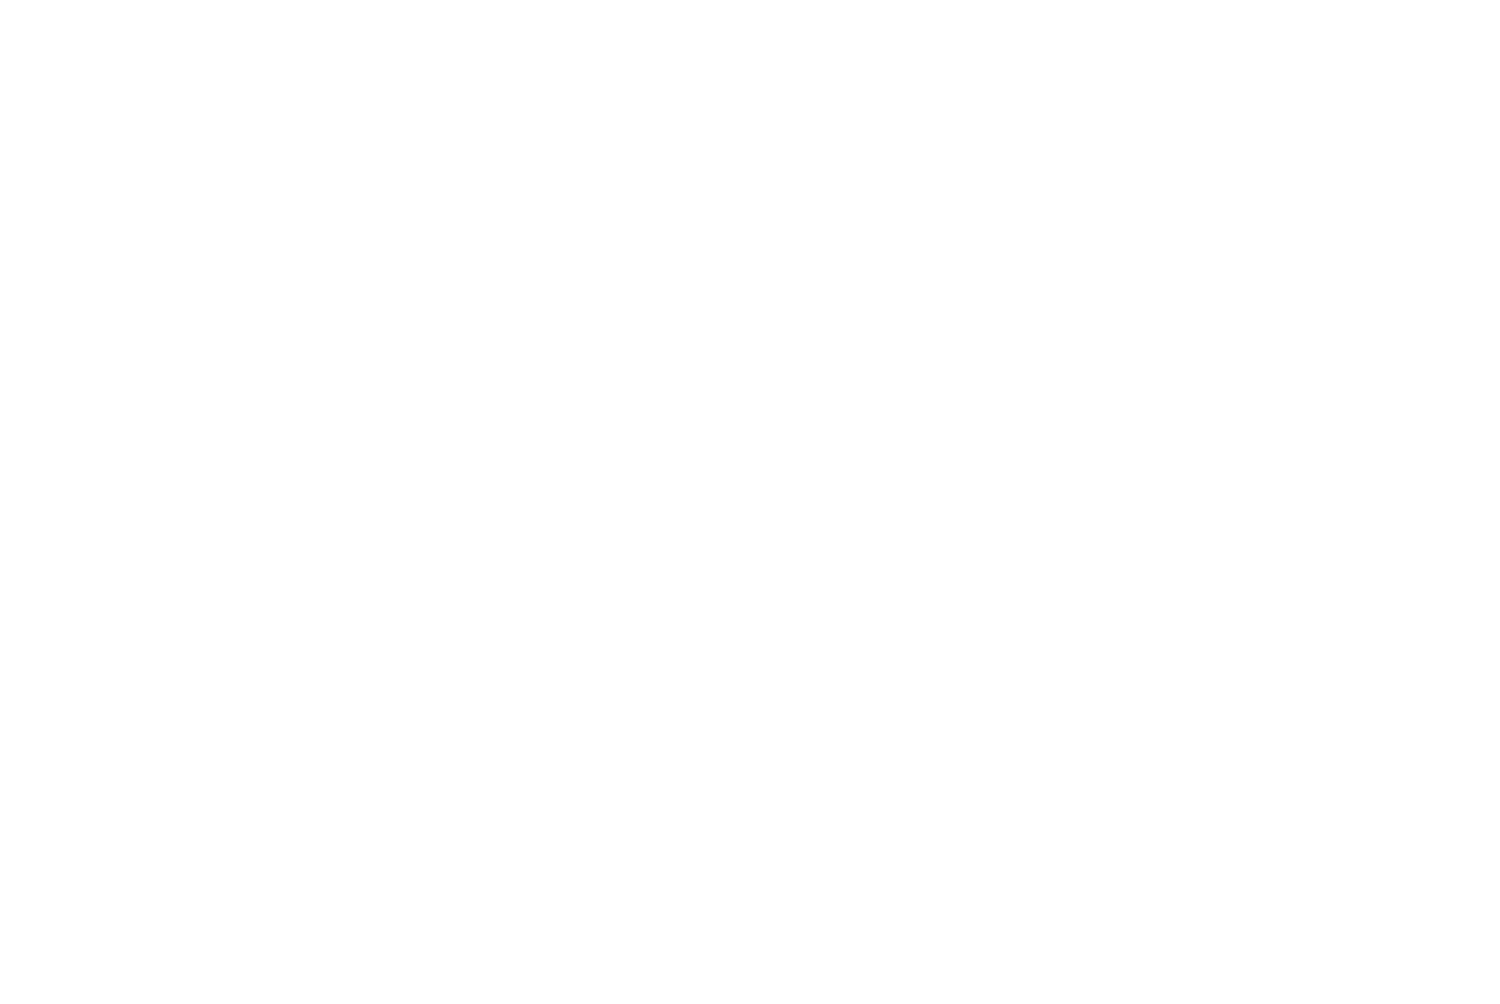 spacewalk - a film and television company